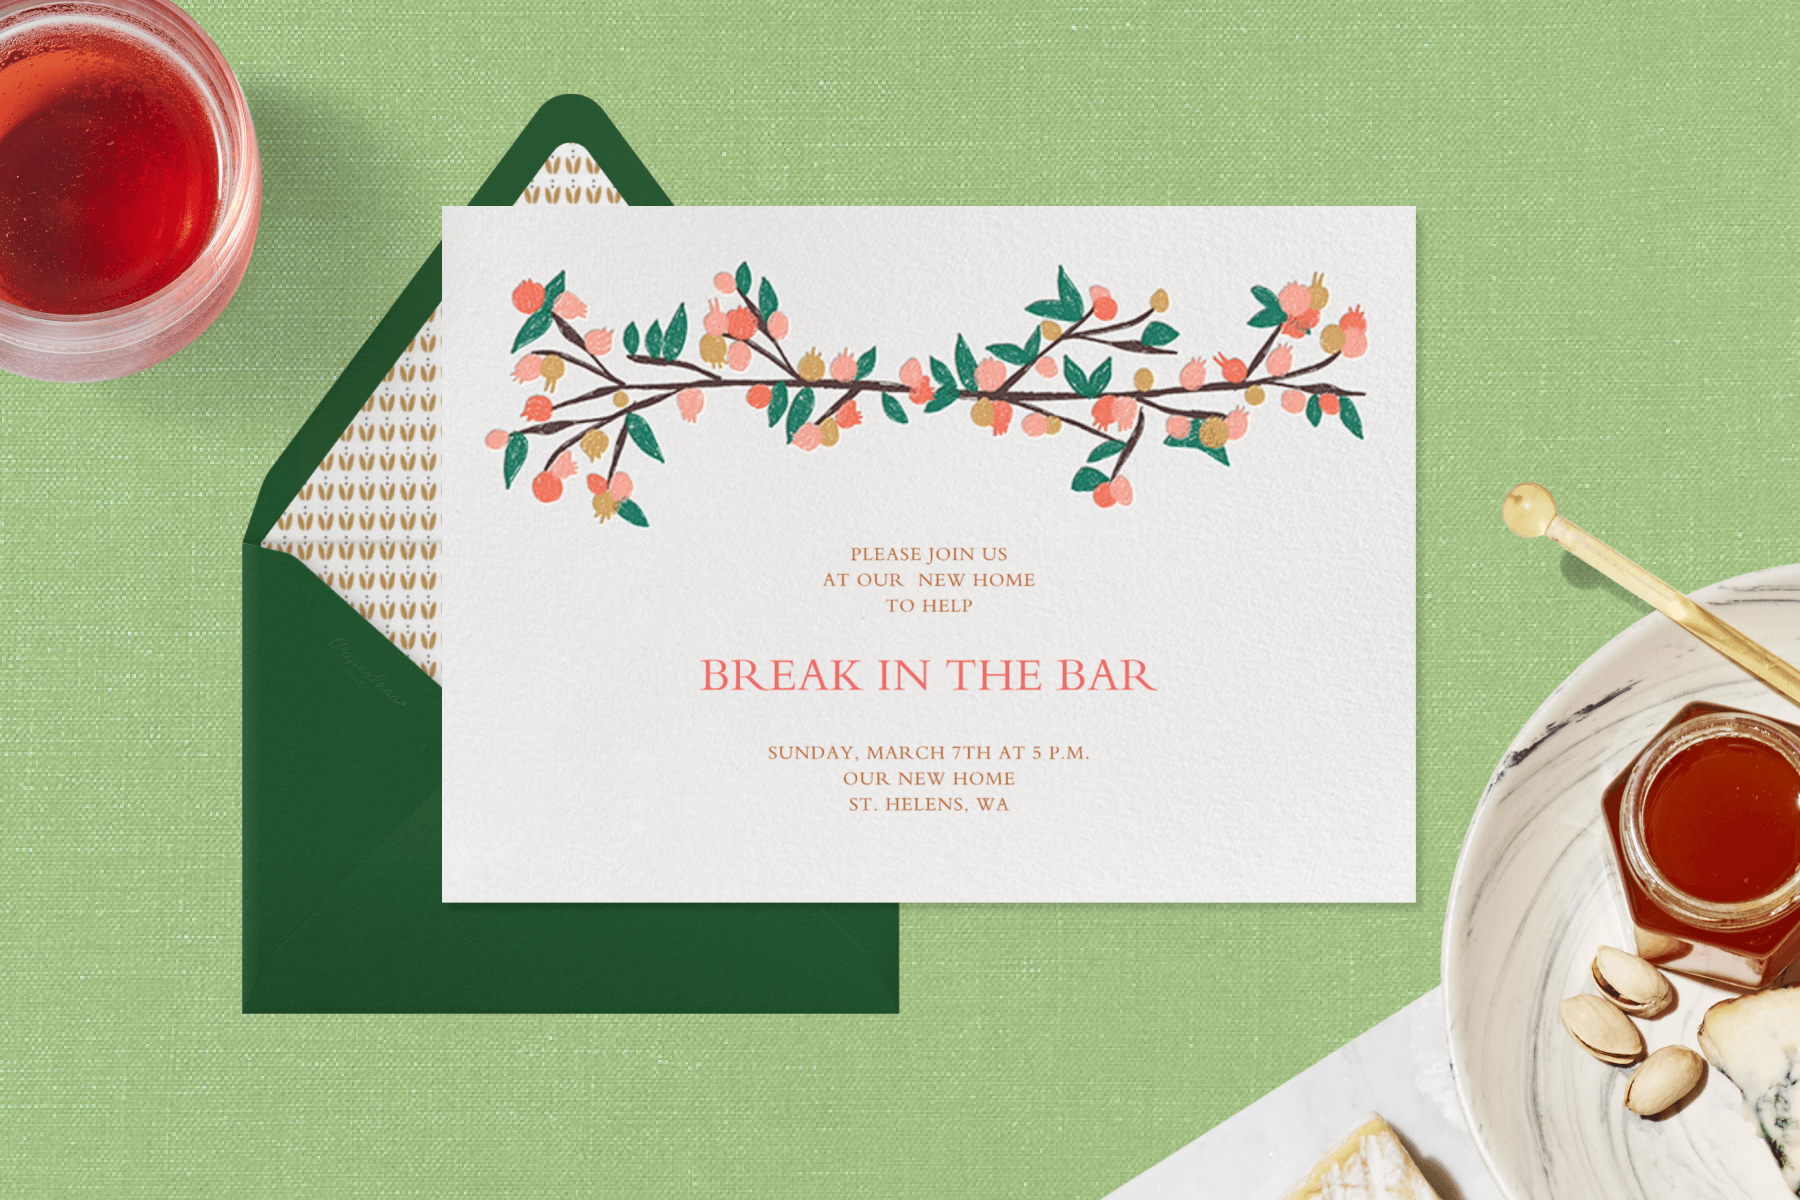 A white invitation with a branch with pink and gold berries and green leaves and the words “Break in the bar” lies on a green background with a dark green envelope, a red drink, and a plate with cheese, nuts, and honey.